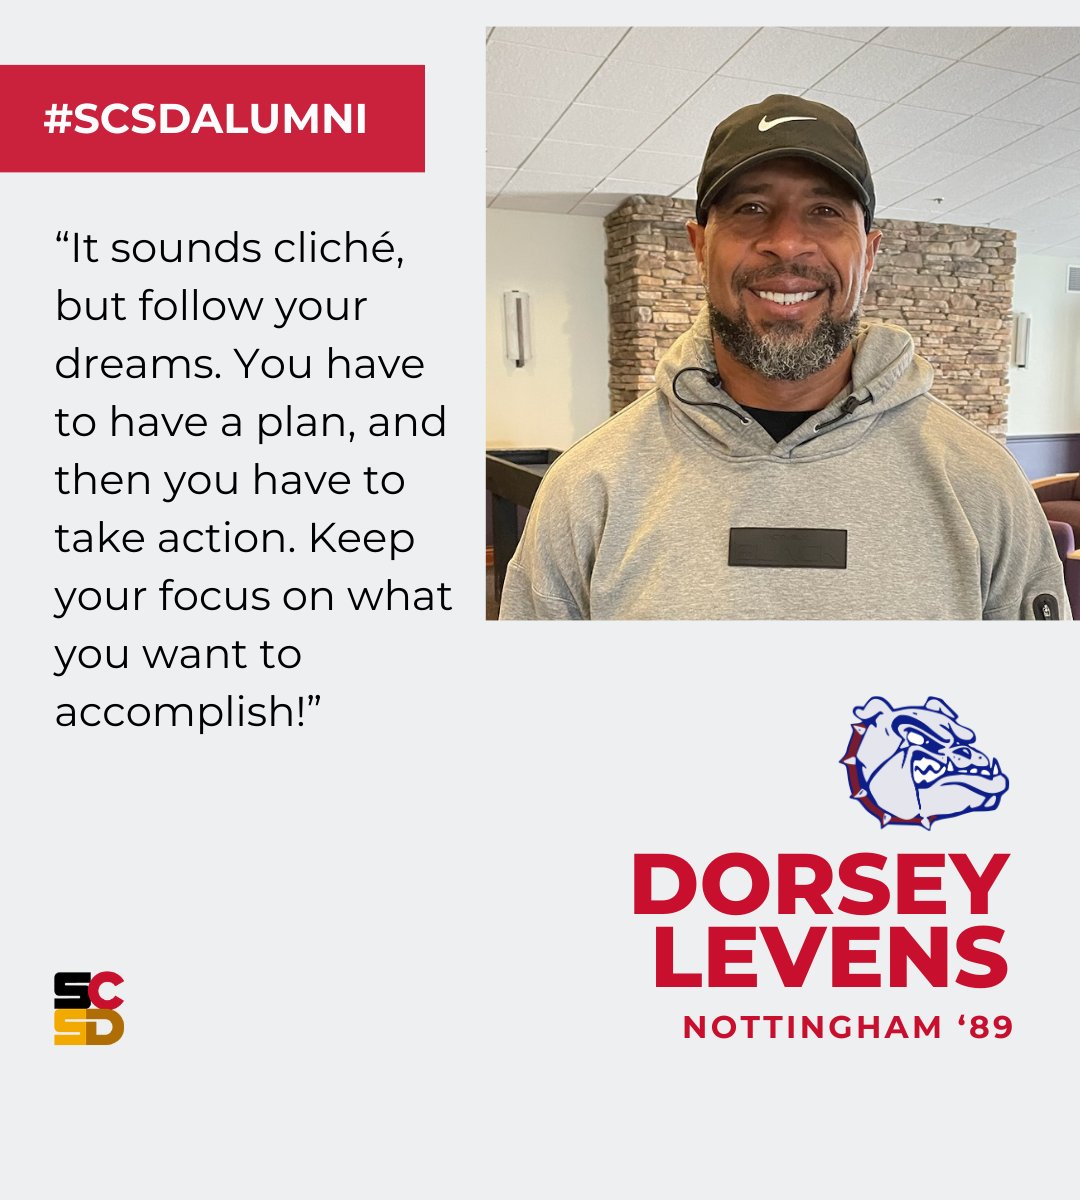 We’re always happy to share the success of #SCSDAlumni - like @NFL great Dorsey Levens (@NottinghamSCSD ’89)! Mr. Levens played for the Green Bay Packers, the Philadelphia Eagles, and the New York Giants, including playing in three SuperBowls, and winning Superbowl XXXI.